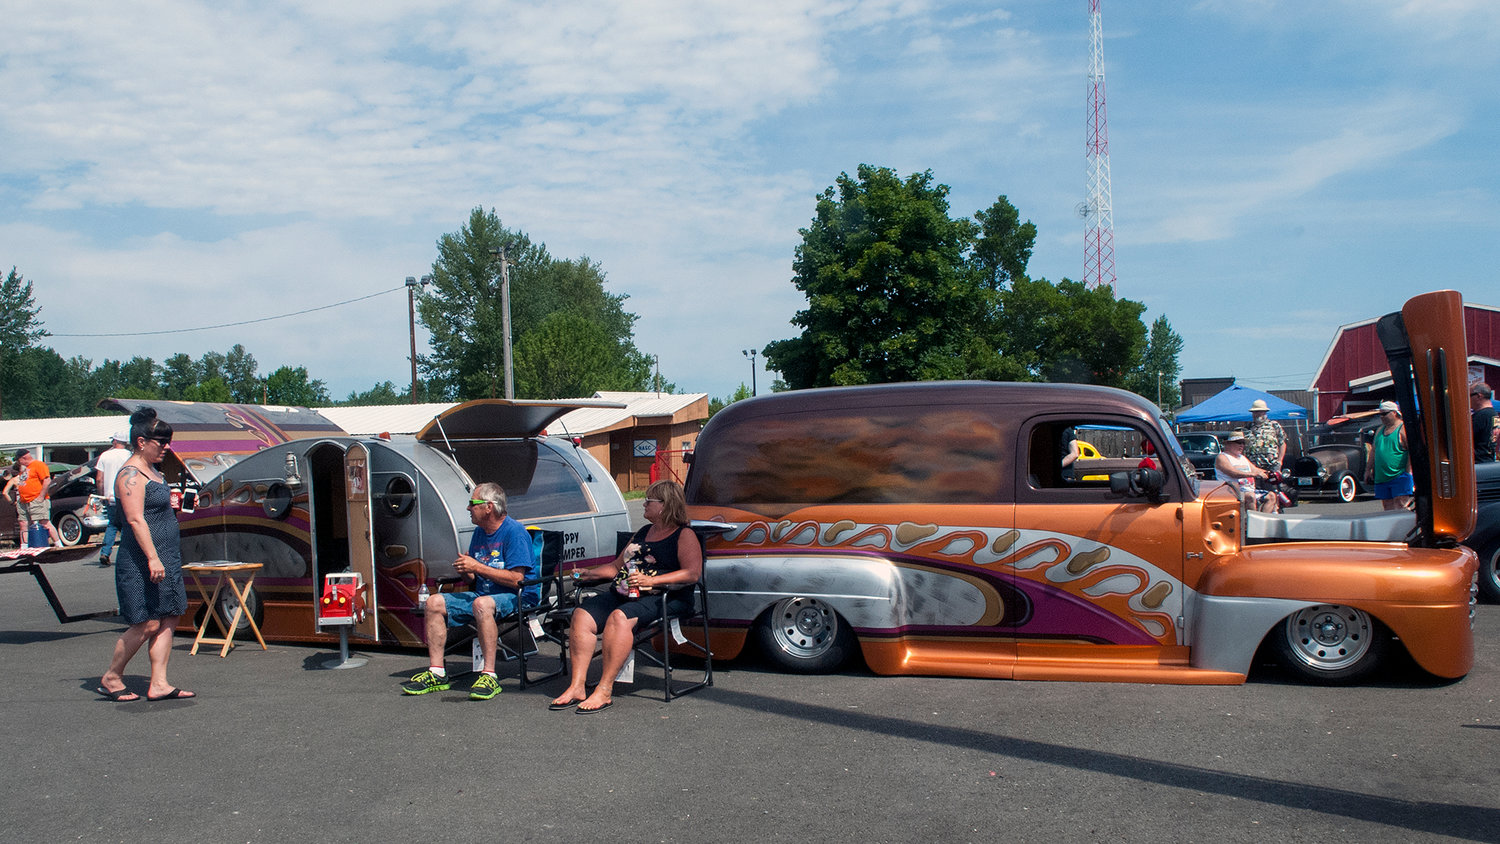 Ed and Janet Kelson, of Covington, answer questions from spectator Jennifer Walters, of Seattle, as they show off their 1948 Ford Panel van hot rod and restored 1936 Teardrop trailer at the Billetproof NorthWest car show at the Southwest Washington Fairgrounds Saturday.